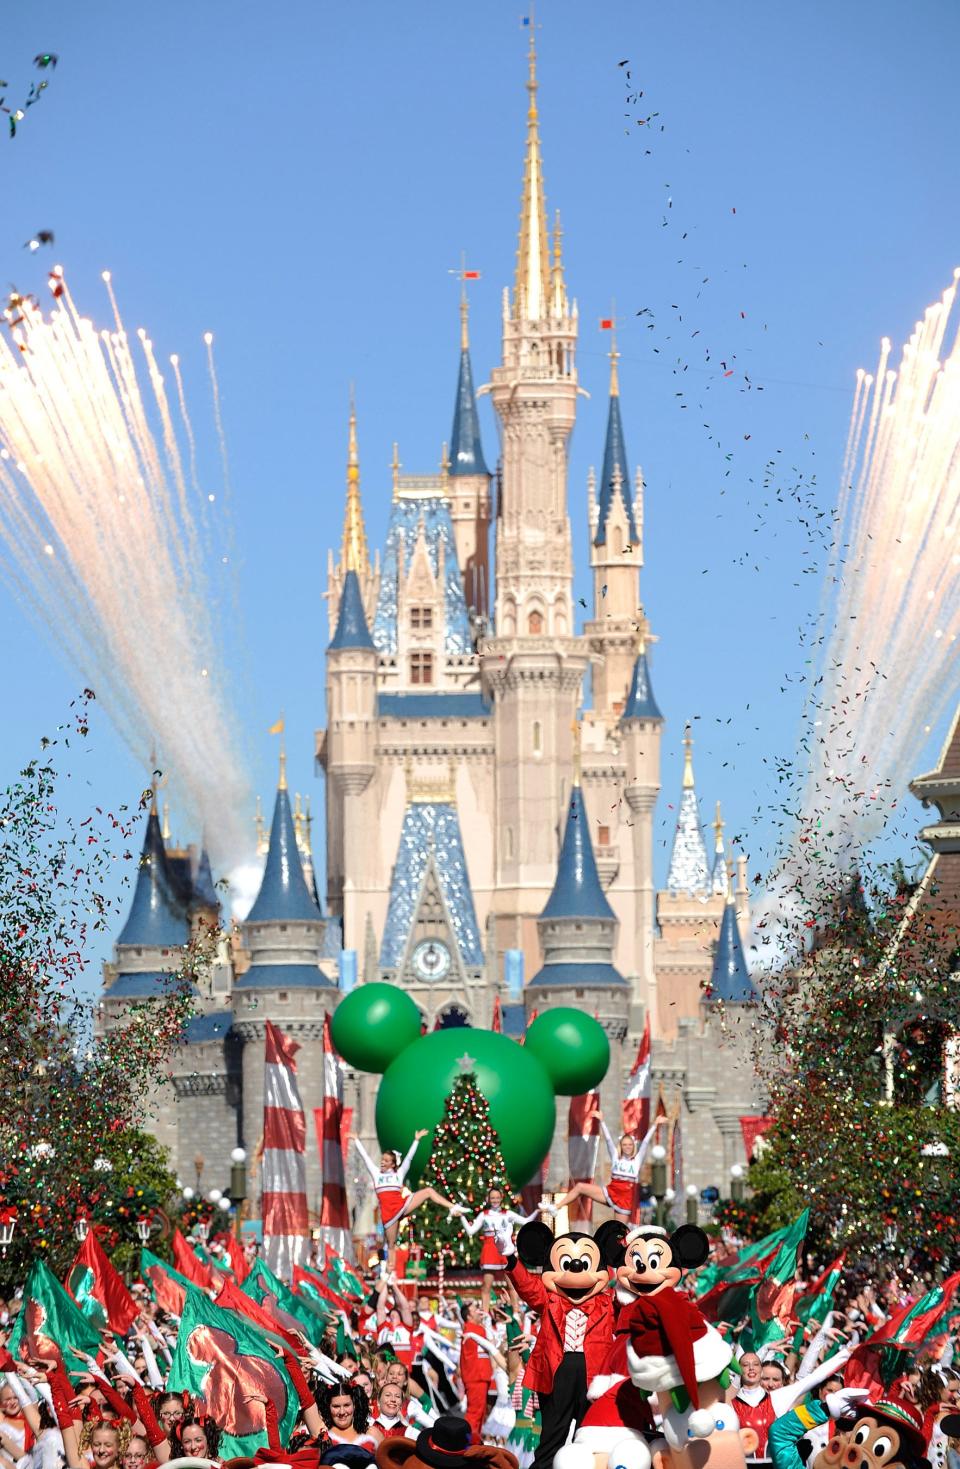 In this publicity image released by Disney, characters Mickey and Minnie Mouse wave as fireworks fly during a taping of the Disney Parks Christmas Day Parade special, Friday, Dec. 3, 2010, at the Magic Kingdom in Lake Buena Vista, Fla.  The annual holiday telecast will air on Dec. 25, on ABC. (AP Photo/Disney, Mark Ashman )